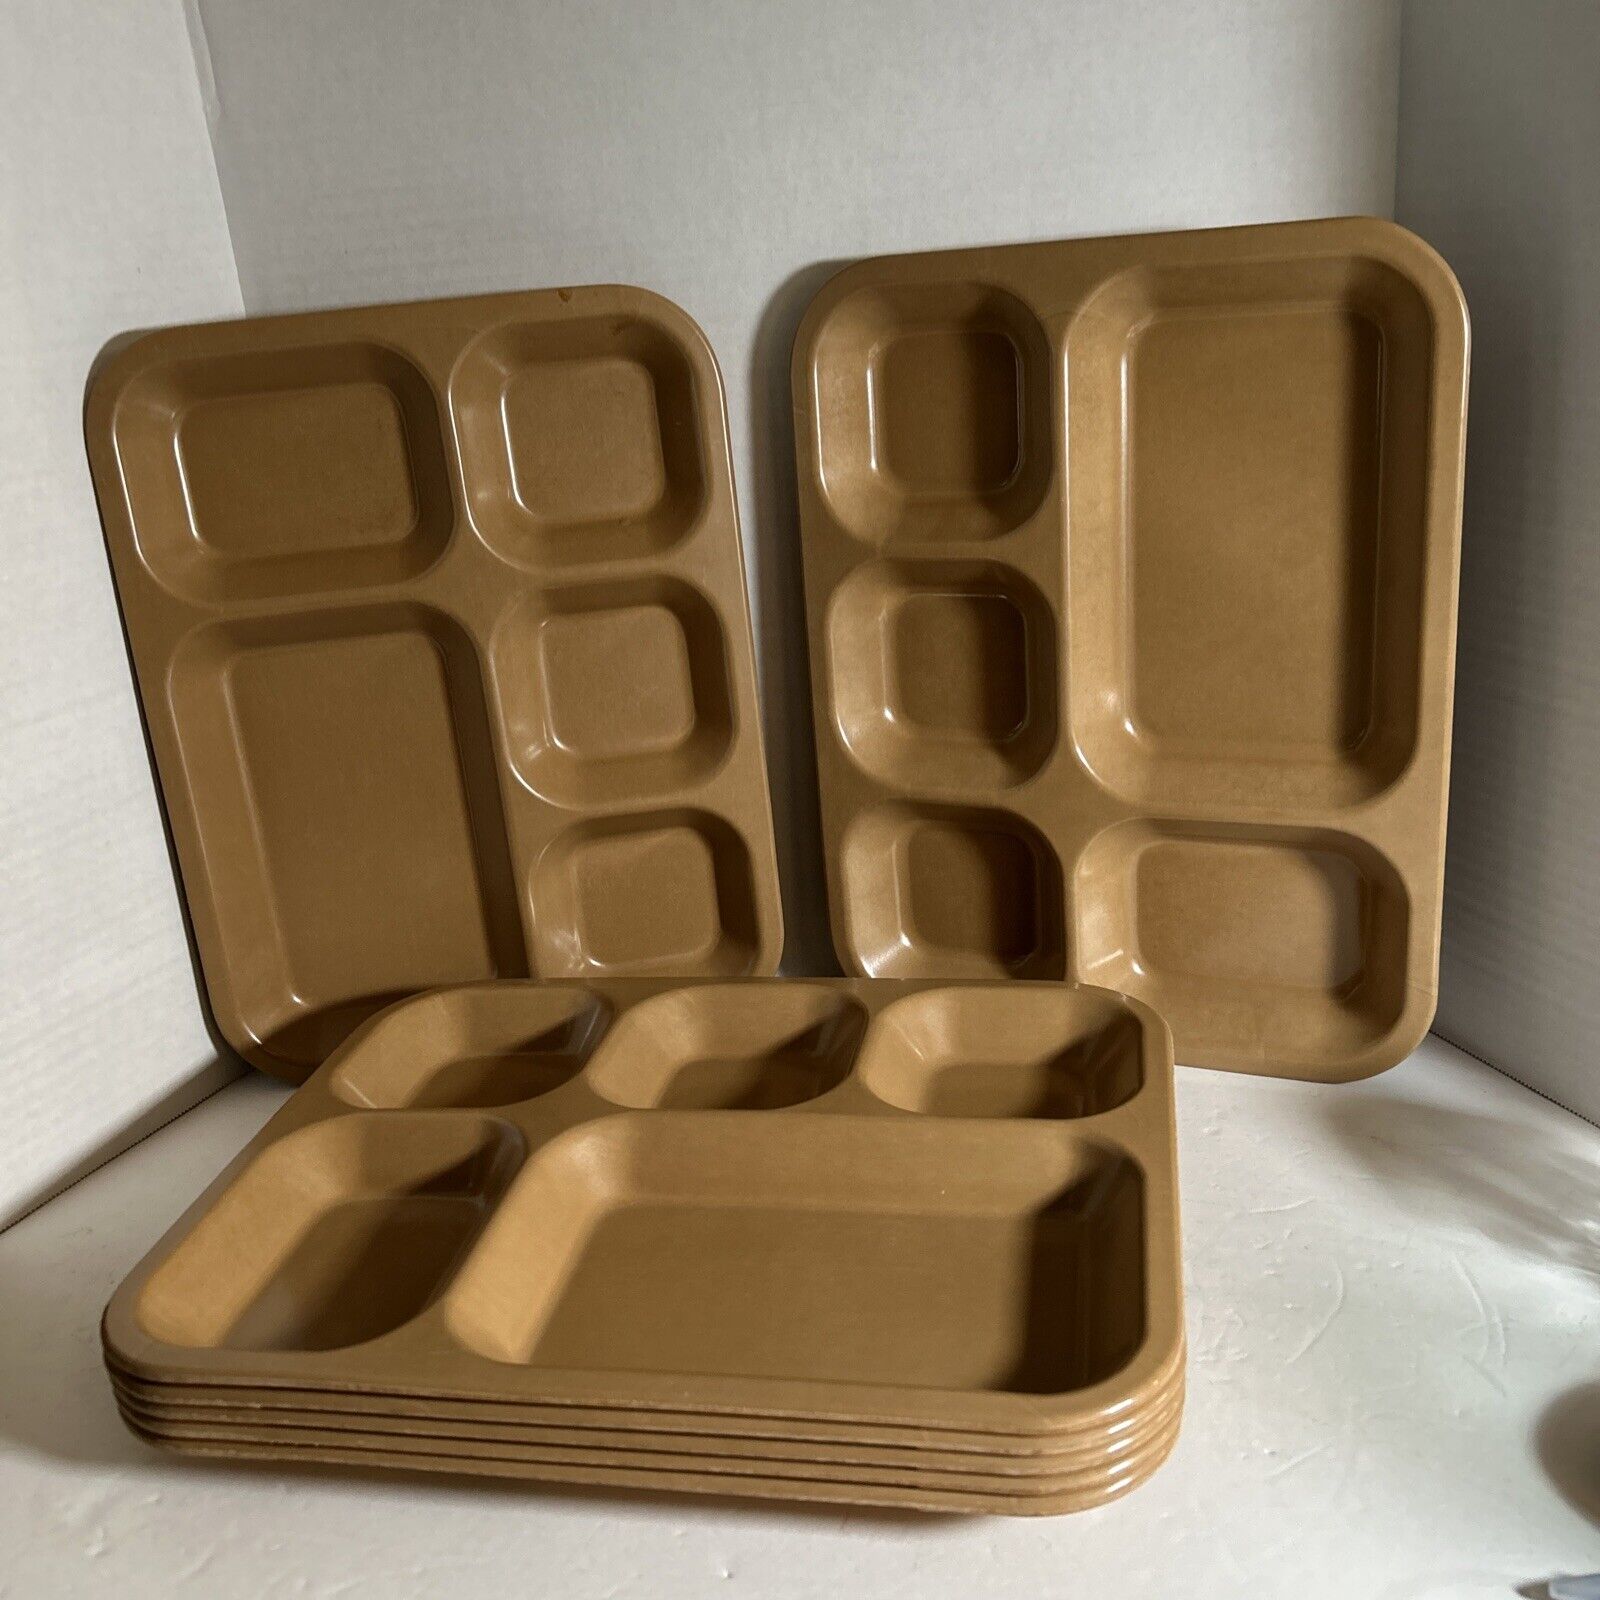 7 Halsey Melamine 1979 U.S. Military Divided Mess Dinner Camping RV Food Tray